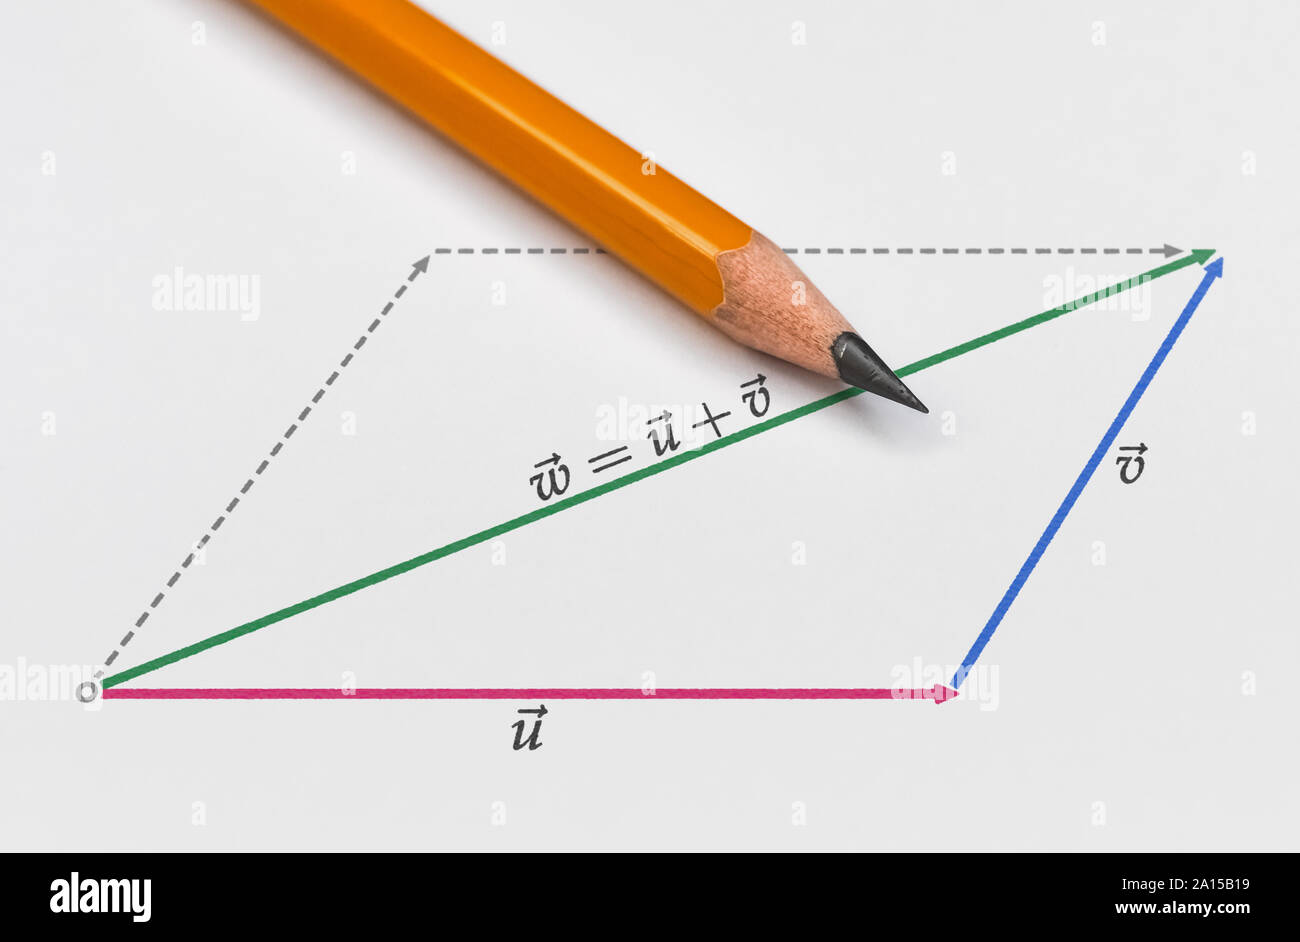 Pencil and a graphical representation of vector summation on bright background Stock Photo